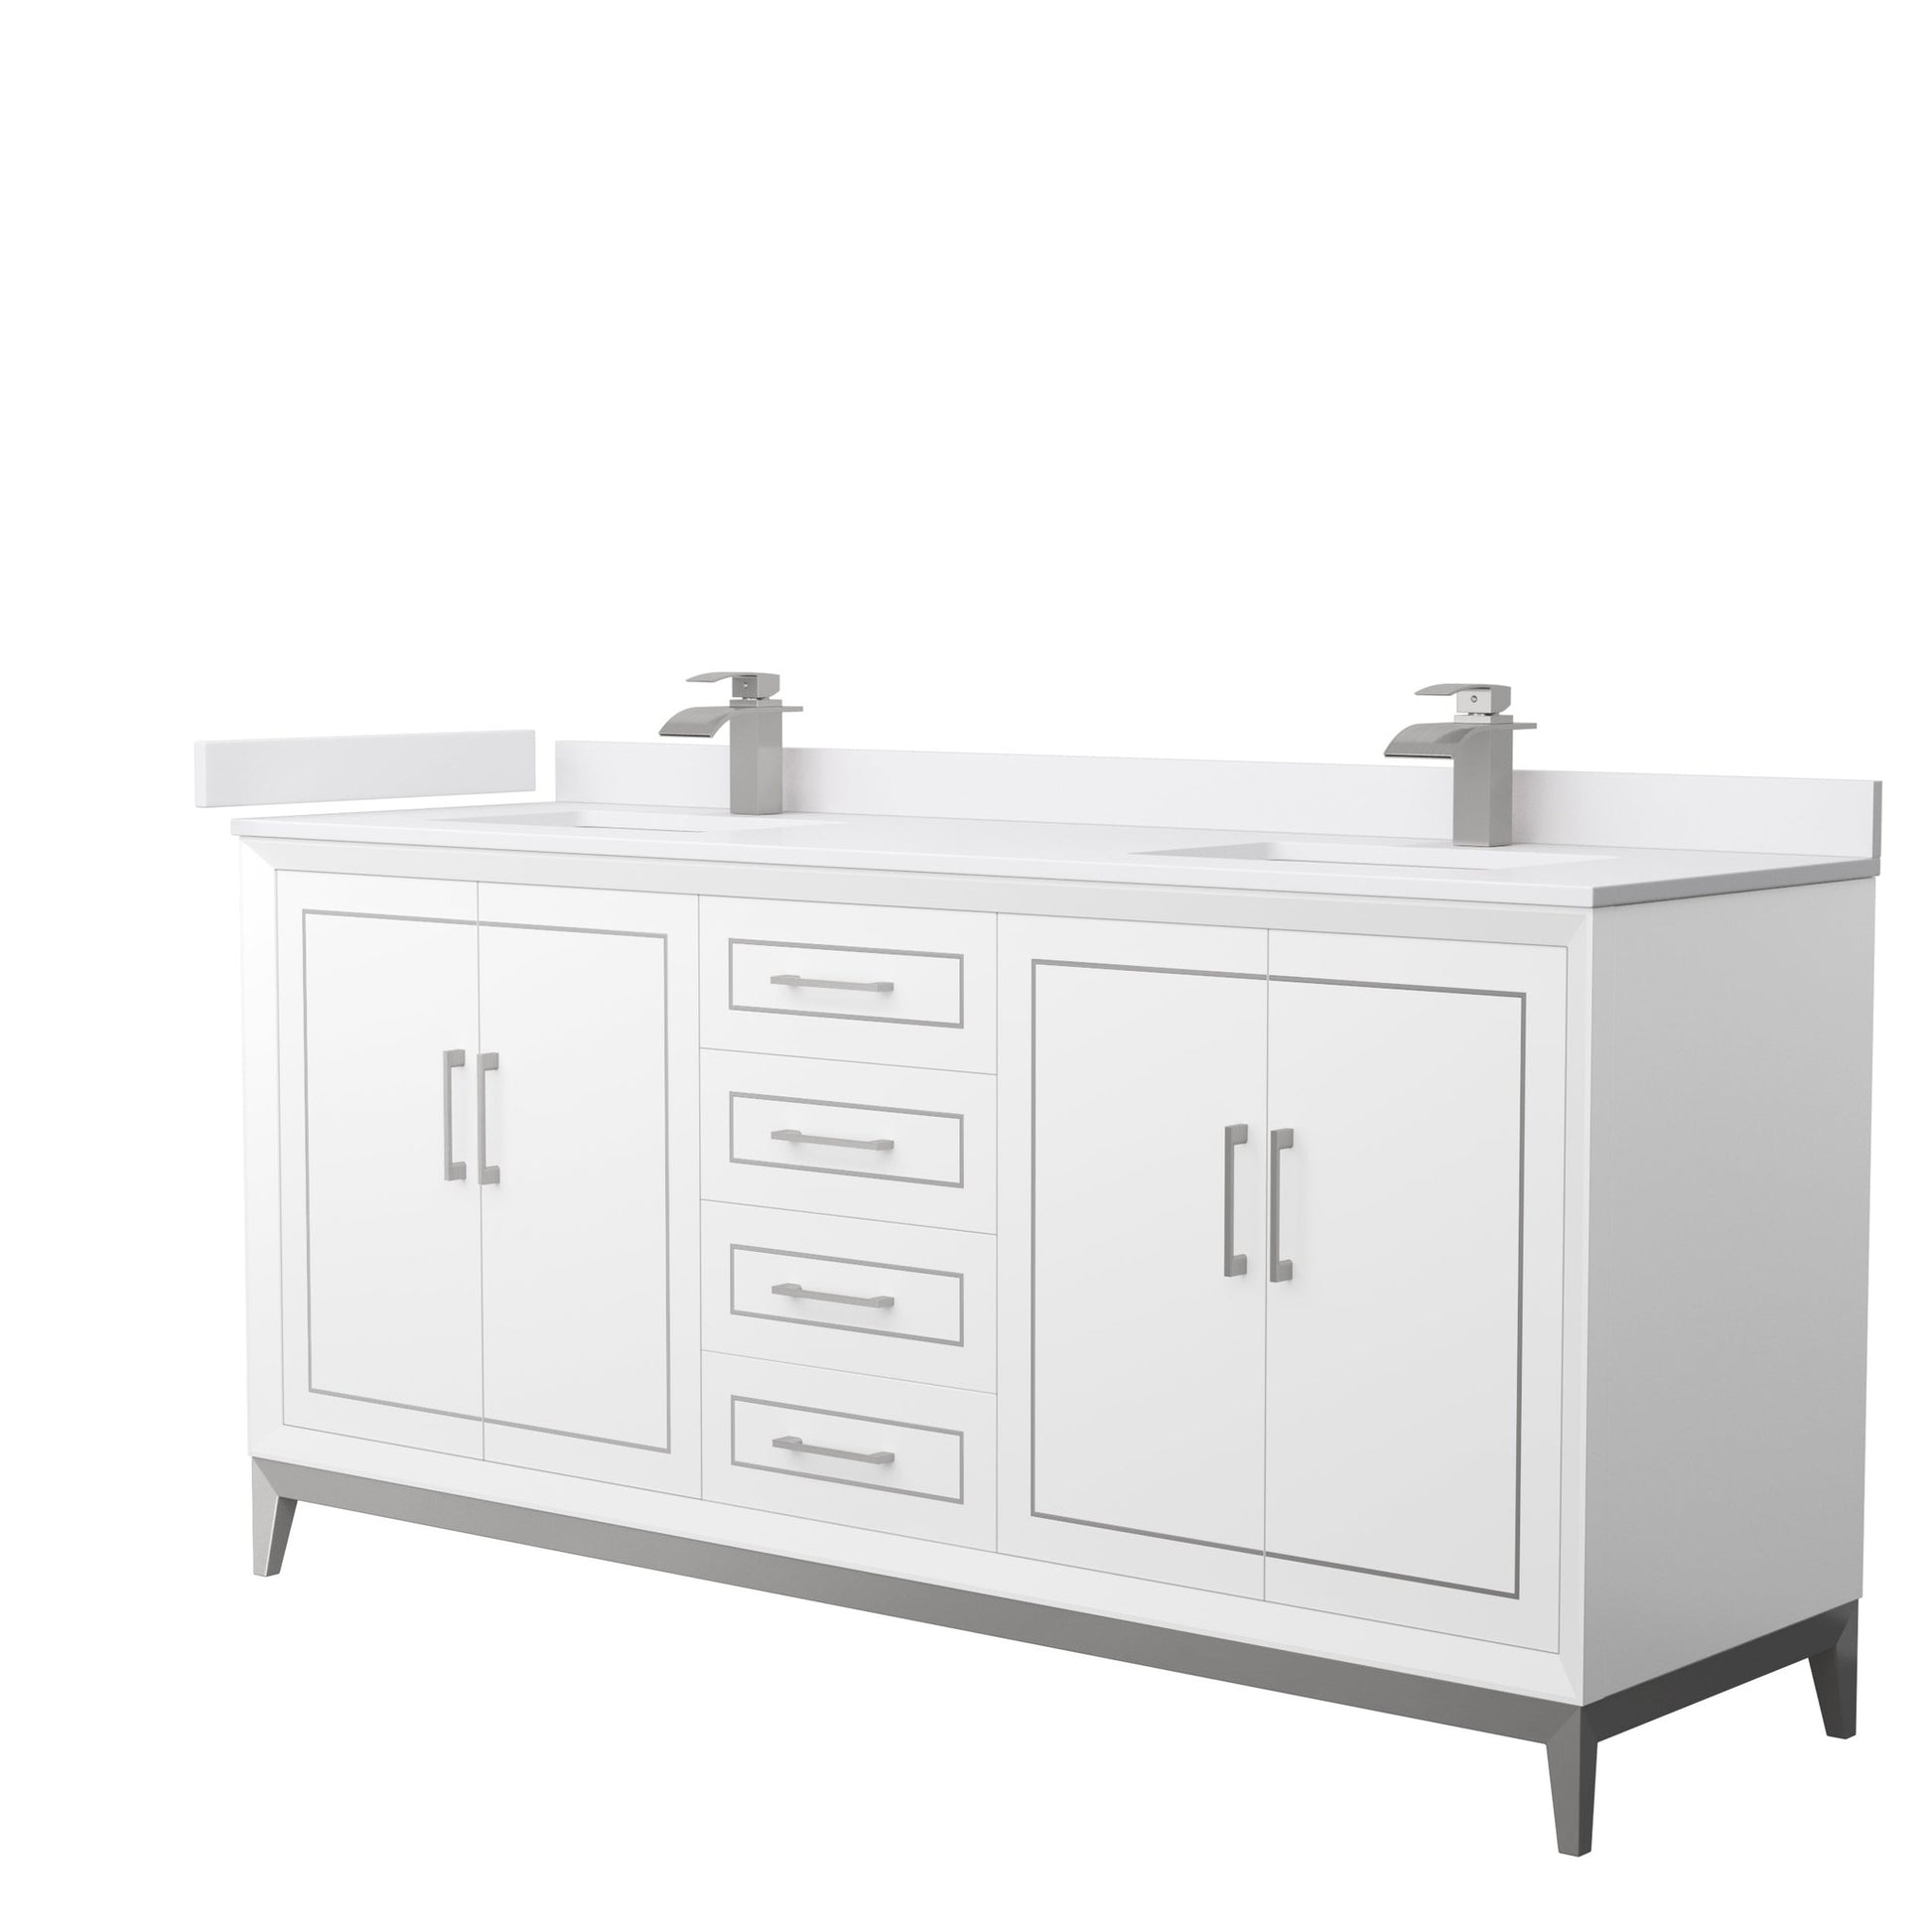 Wyndham Collection Marlena 72" Double Bathroom Vanity in White, White Cultured Marble Countertop, Undermount Square Sinks, Brushed Nickel Trim